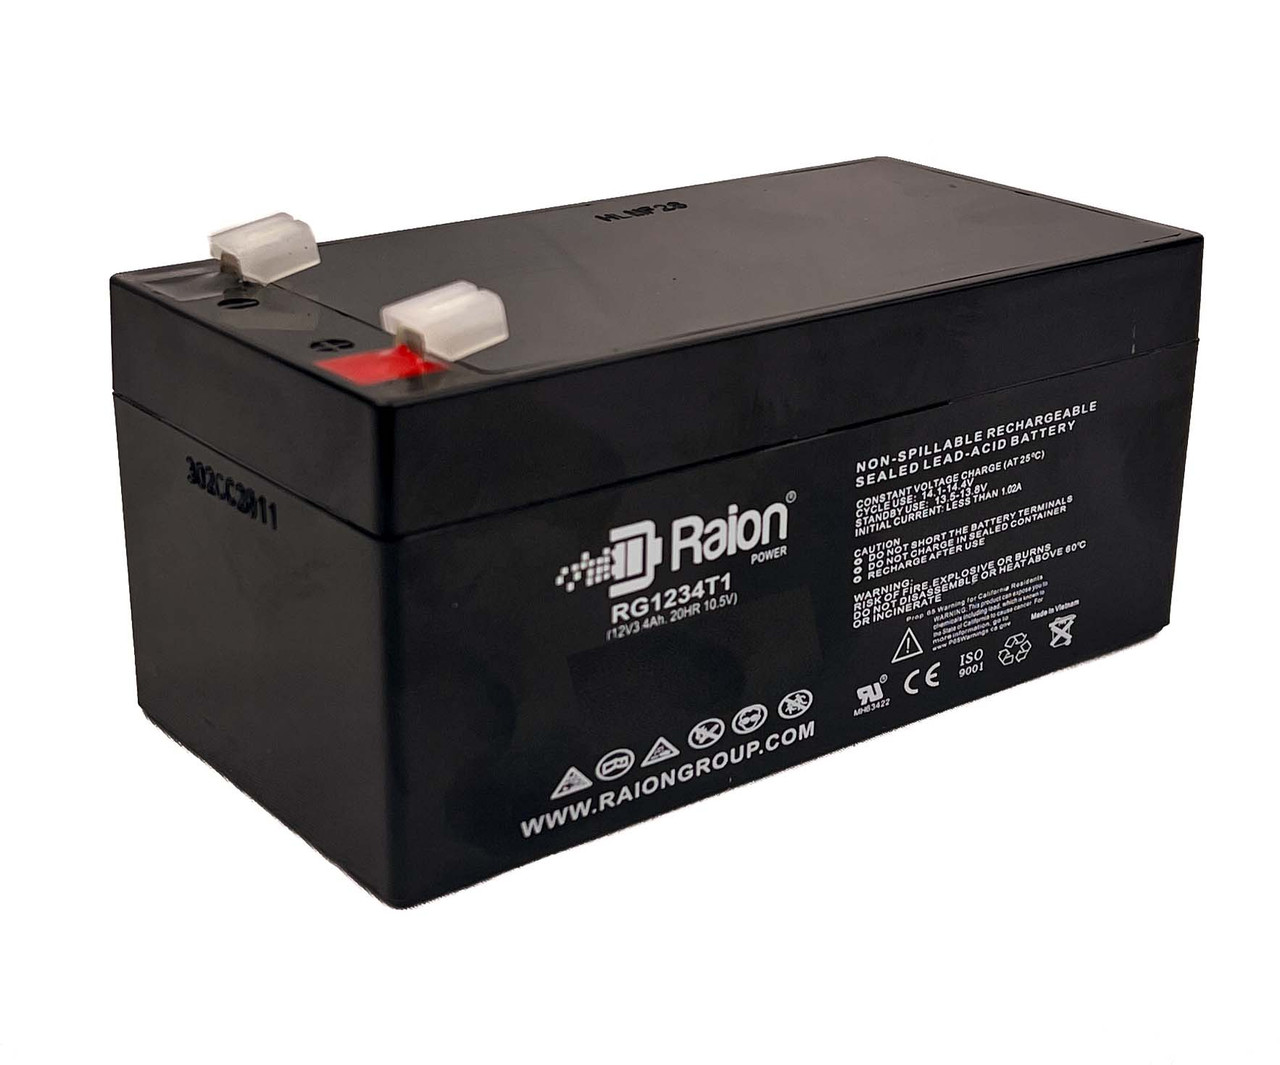 Raion Power 12V 3.4Ah Non-Spillable Replacement Battery for Draeger Medical Fabius GS Anesthesia Machine